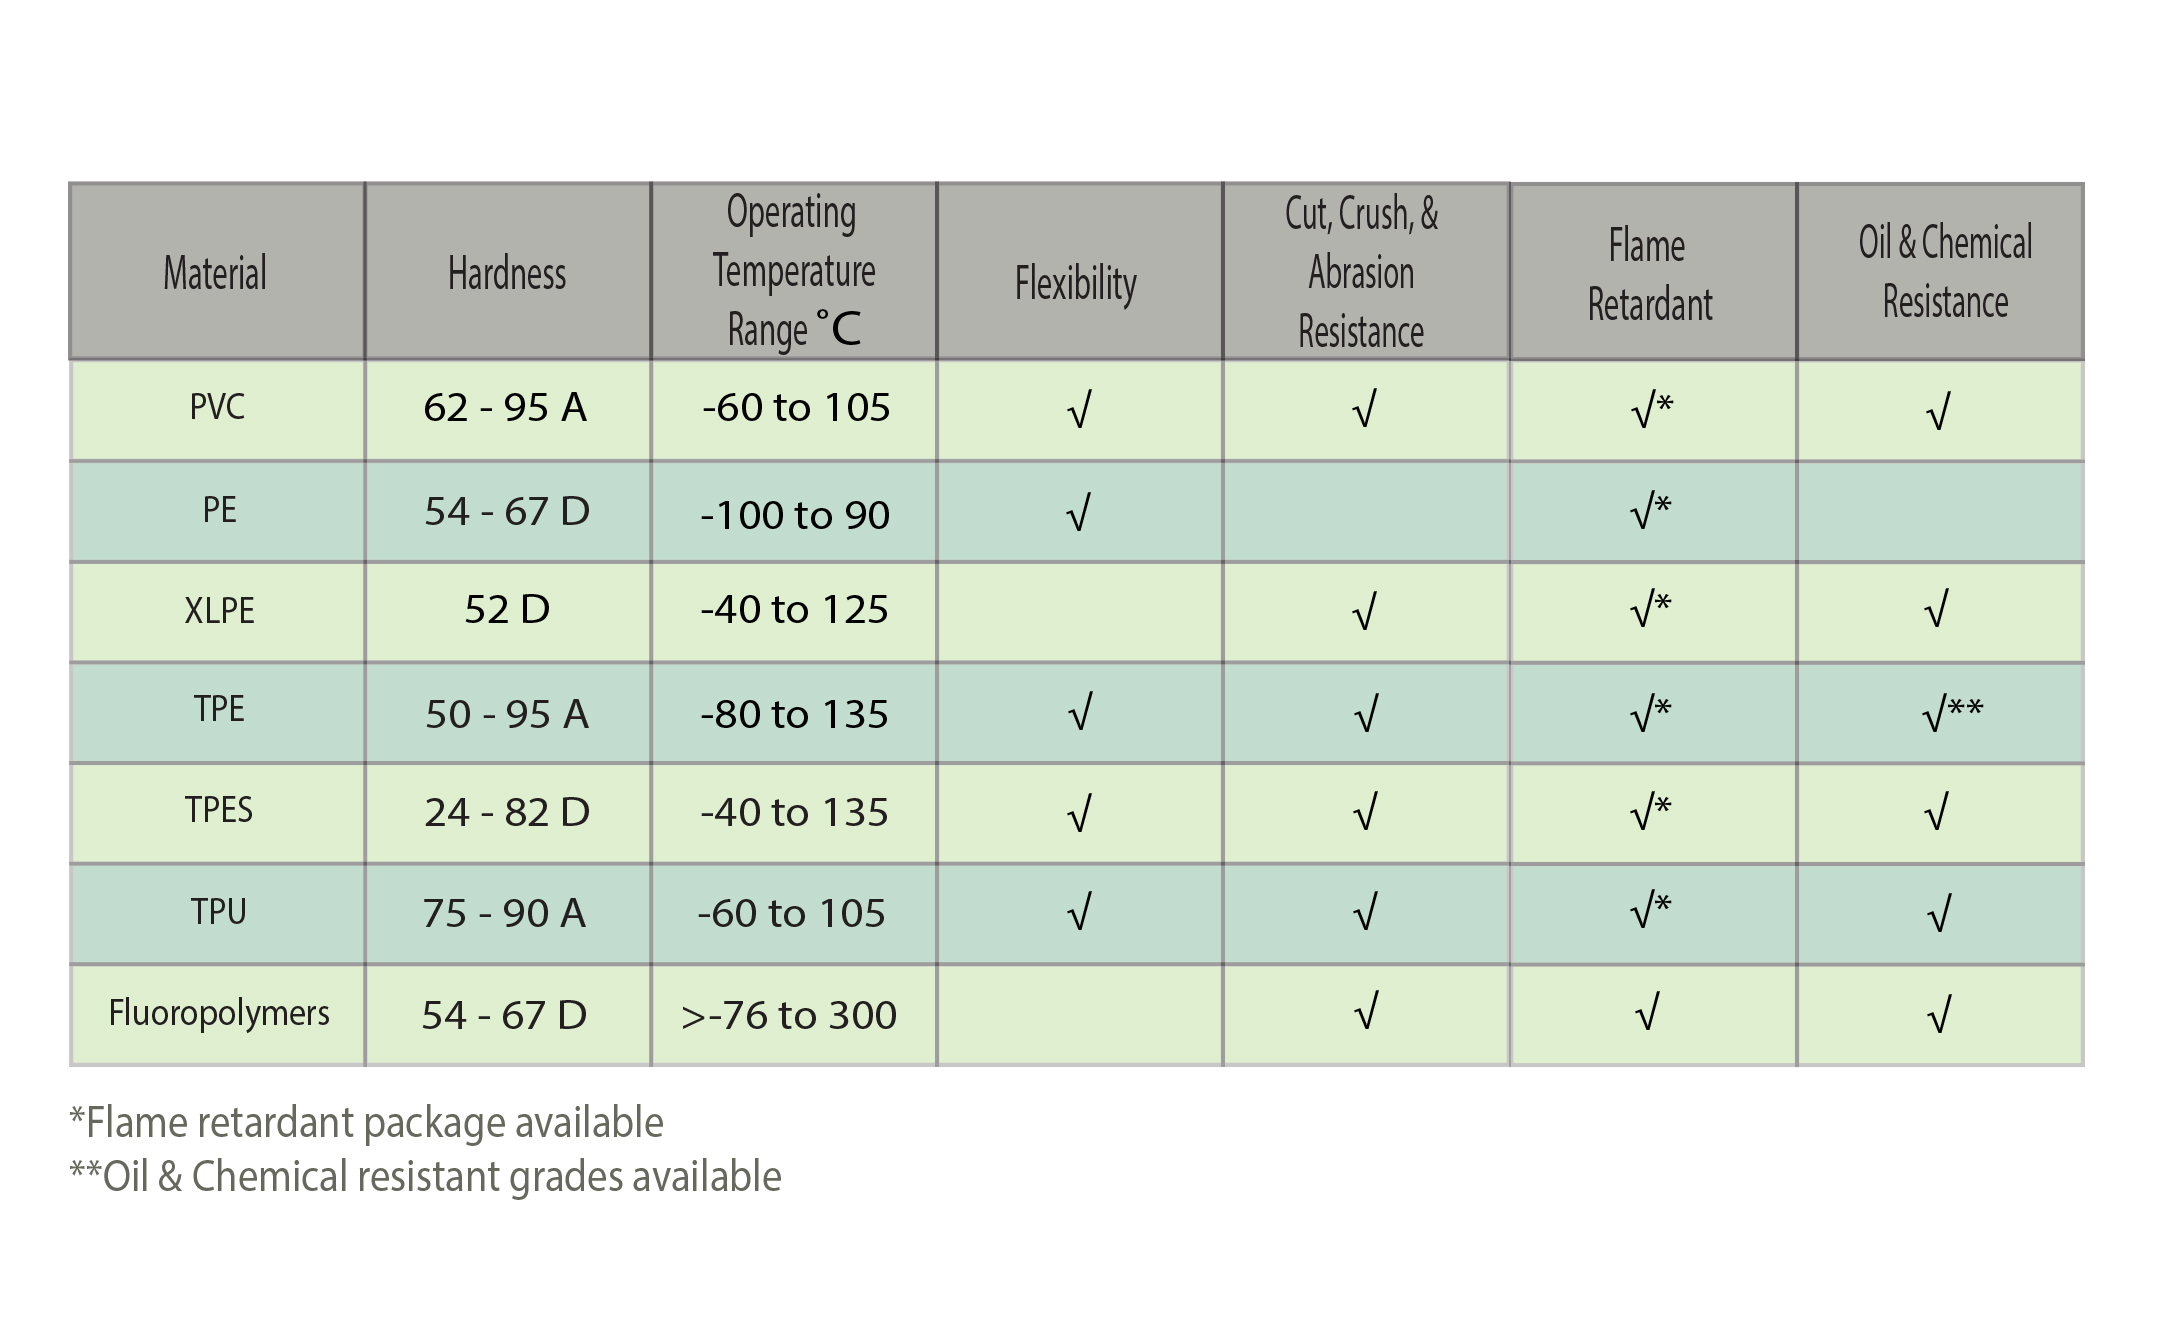 Table showing jacket material benefit comparison